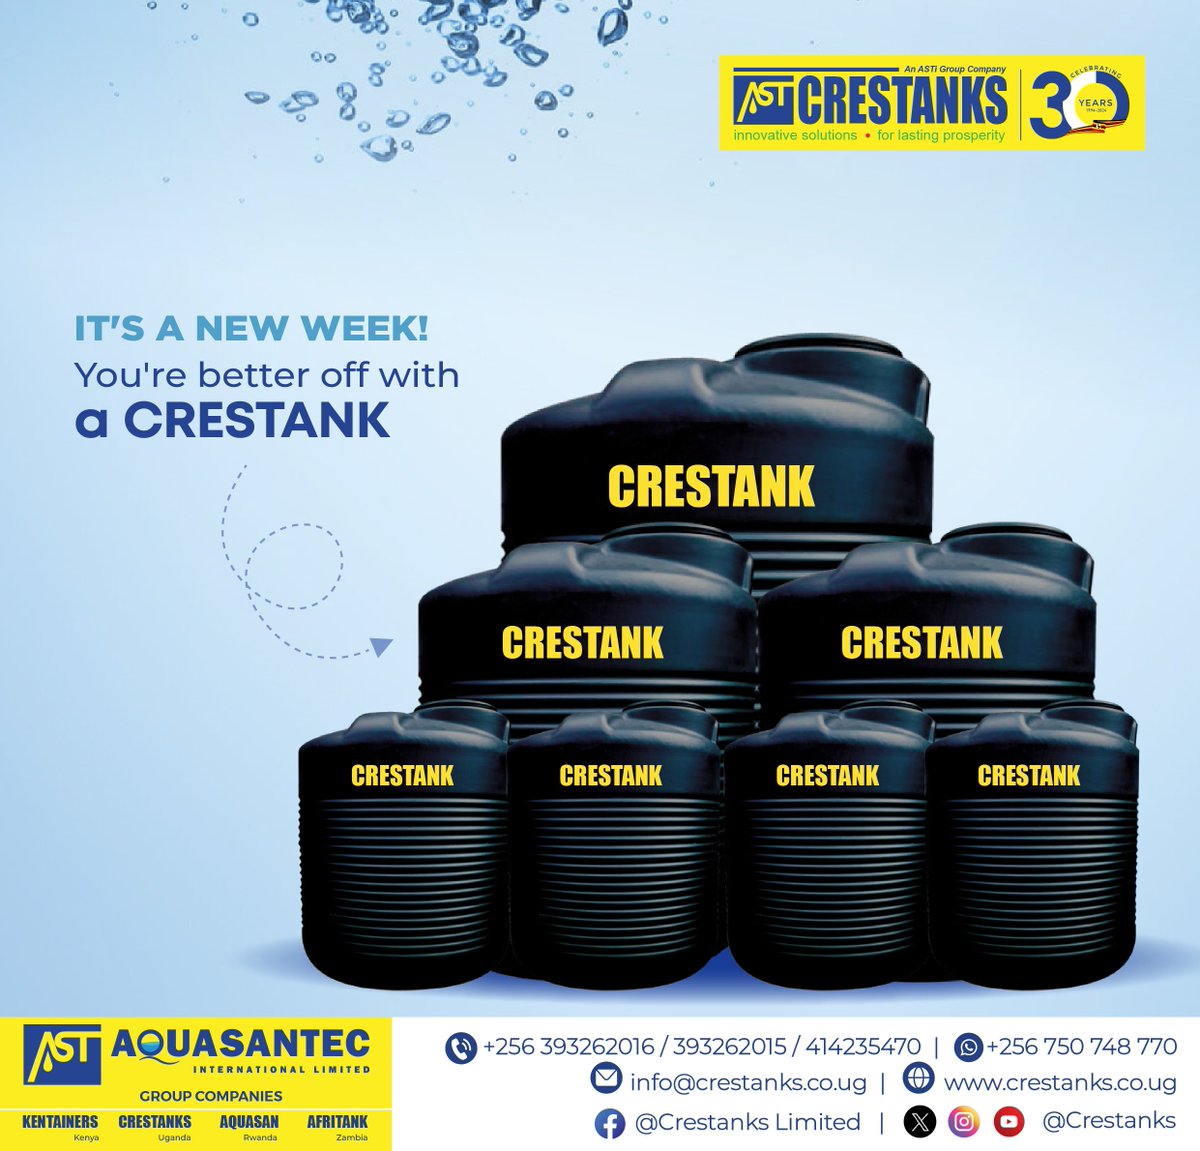 You need a tank you can trust and count on this new week!

Contact us on 0750748770 to place your orders.

#Crestanks #plasticproducts #watertanks #newweek